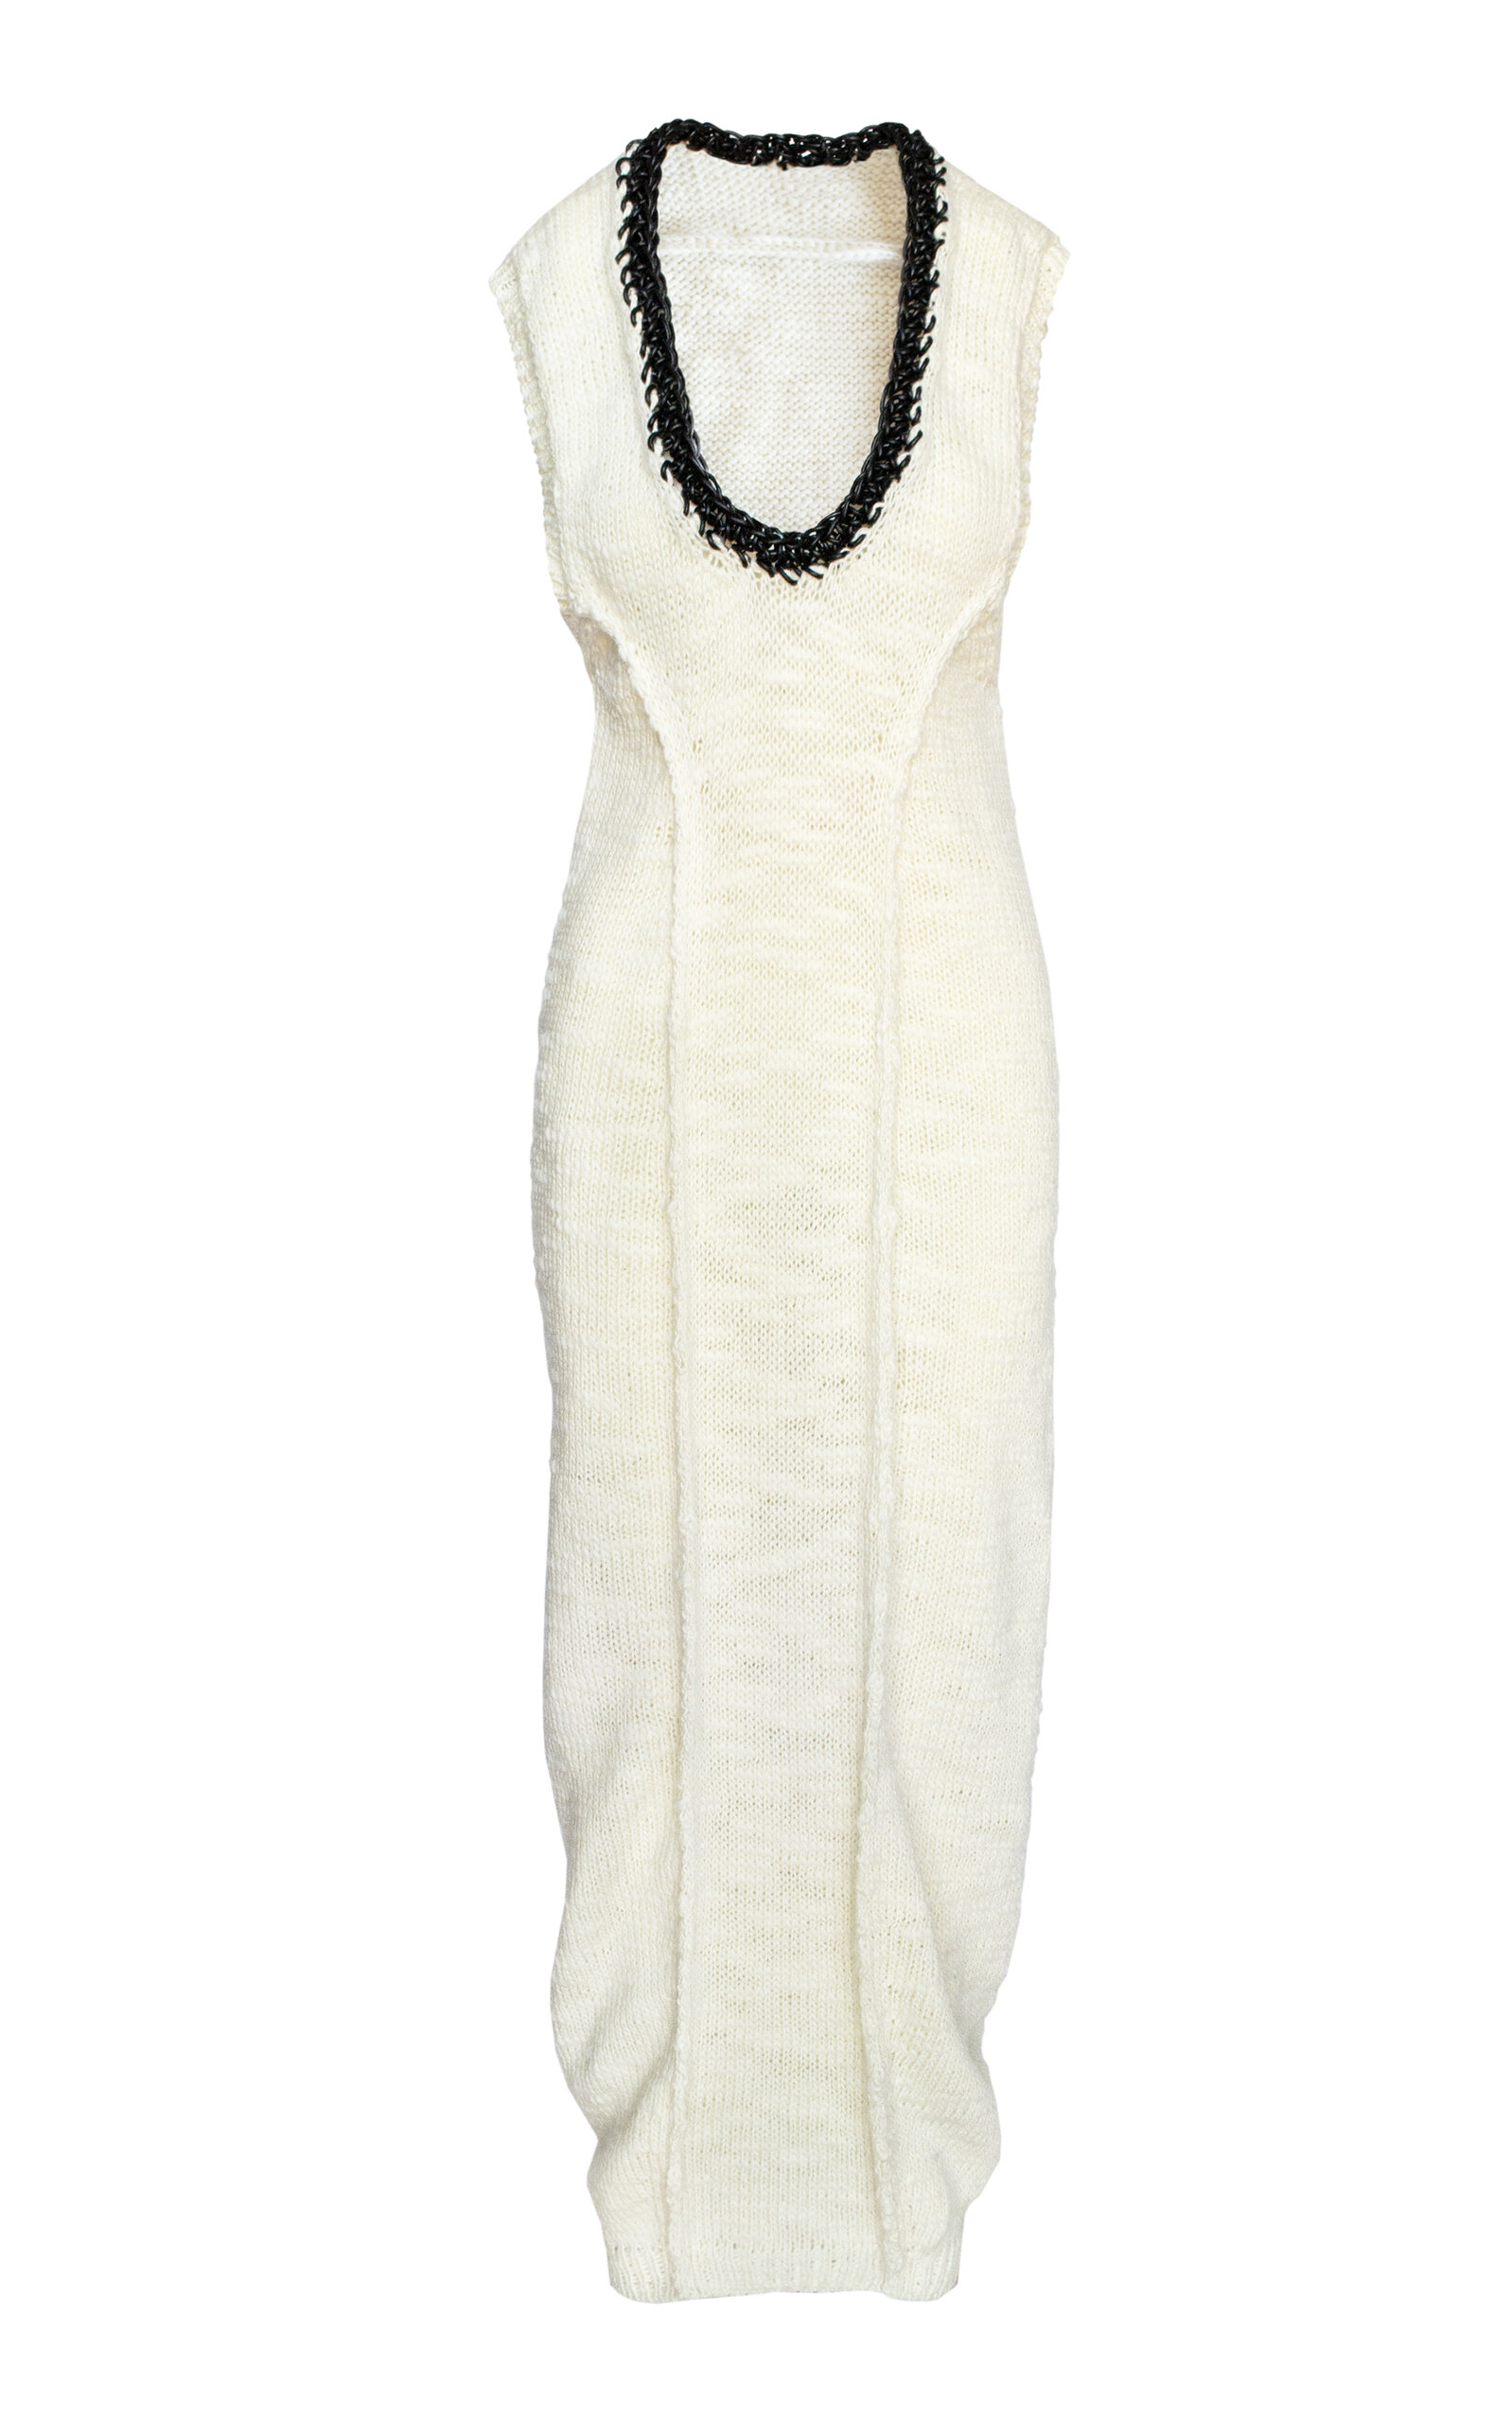 Aisling Camps Leather Crochet Cocoon Dress In Ivory